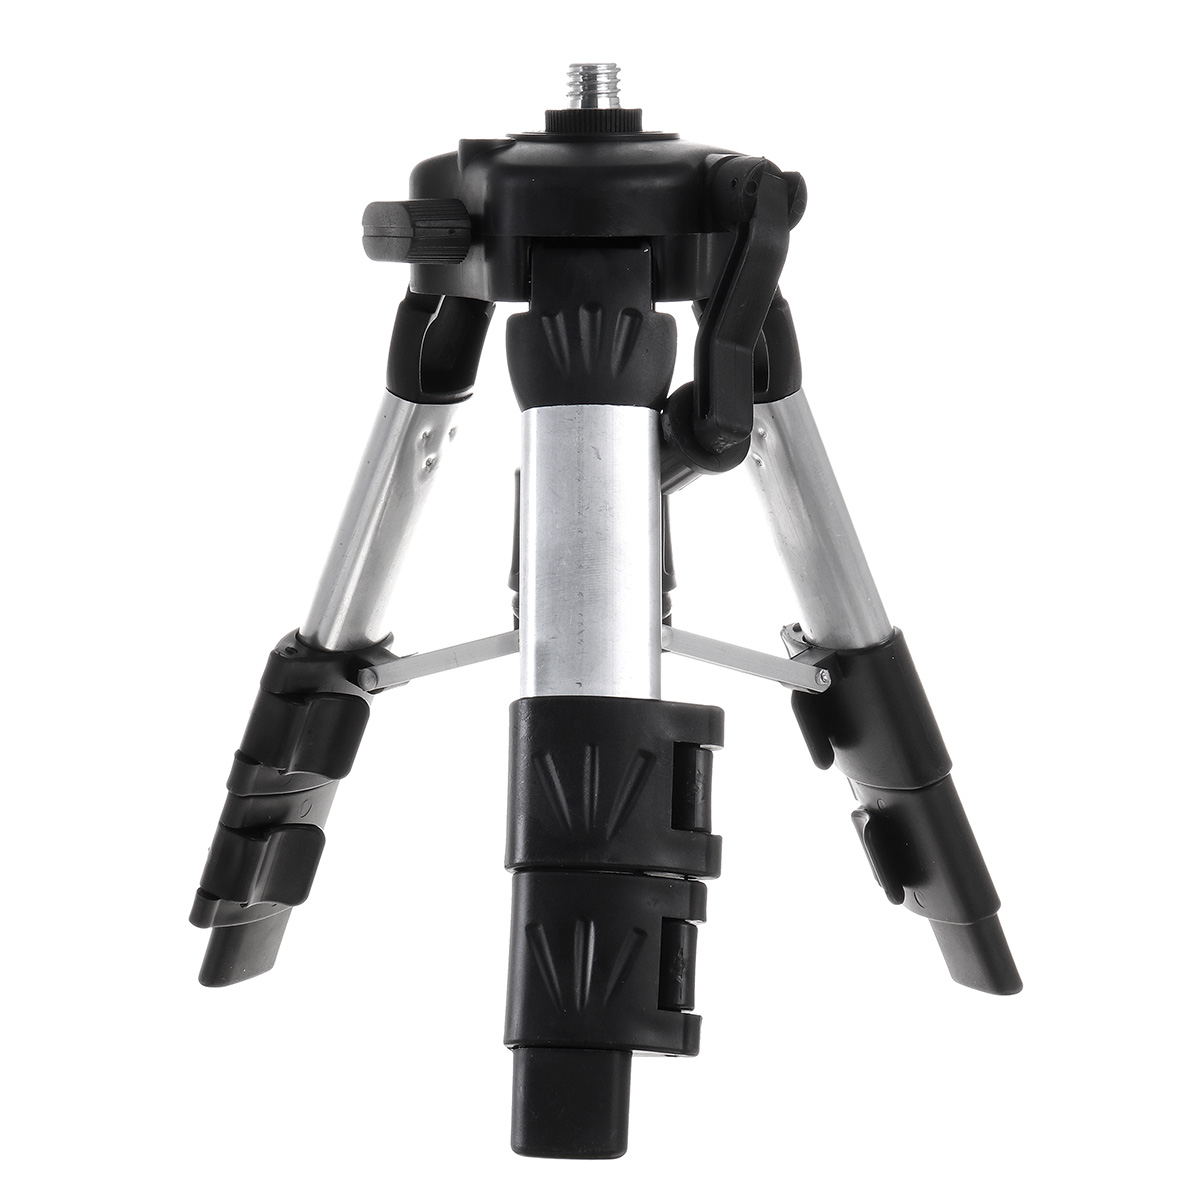 47100CM-Universal-Aluminum-Alloy-Tripod-Adjustable-Stand-for-Laser-Level-with-Bag-1937846-13